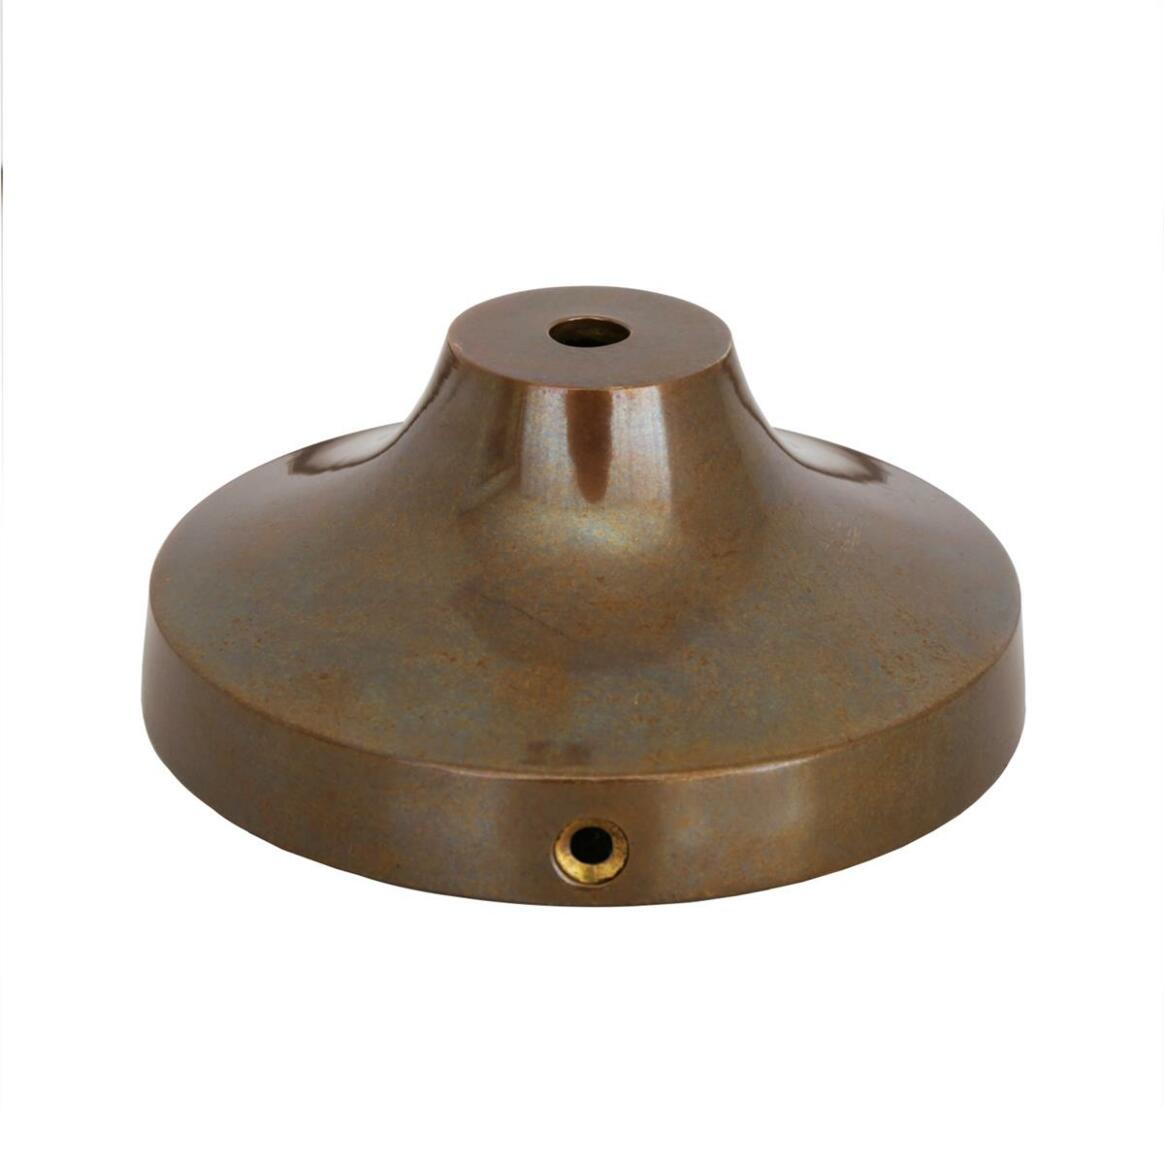 Cast cone wall bracket 11.5cm main product image